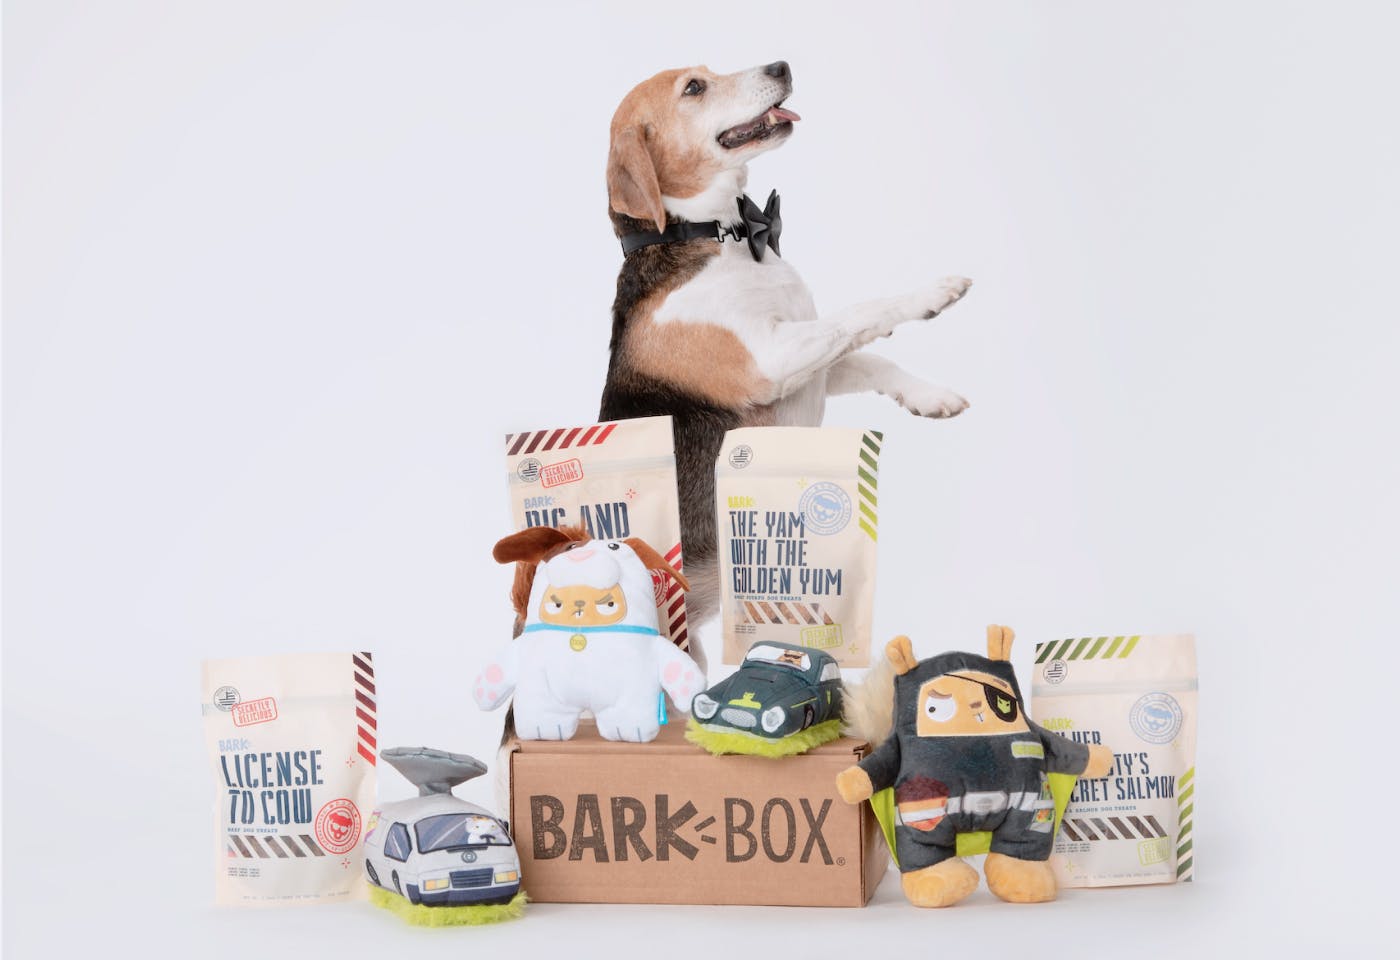 A dog smiling in front of various Bark Box products.